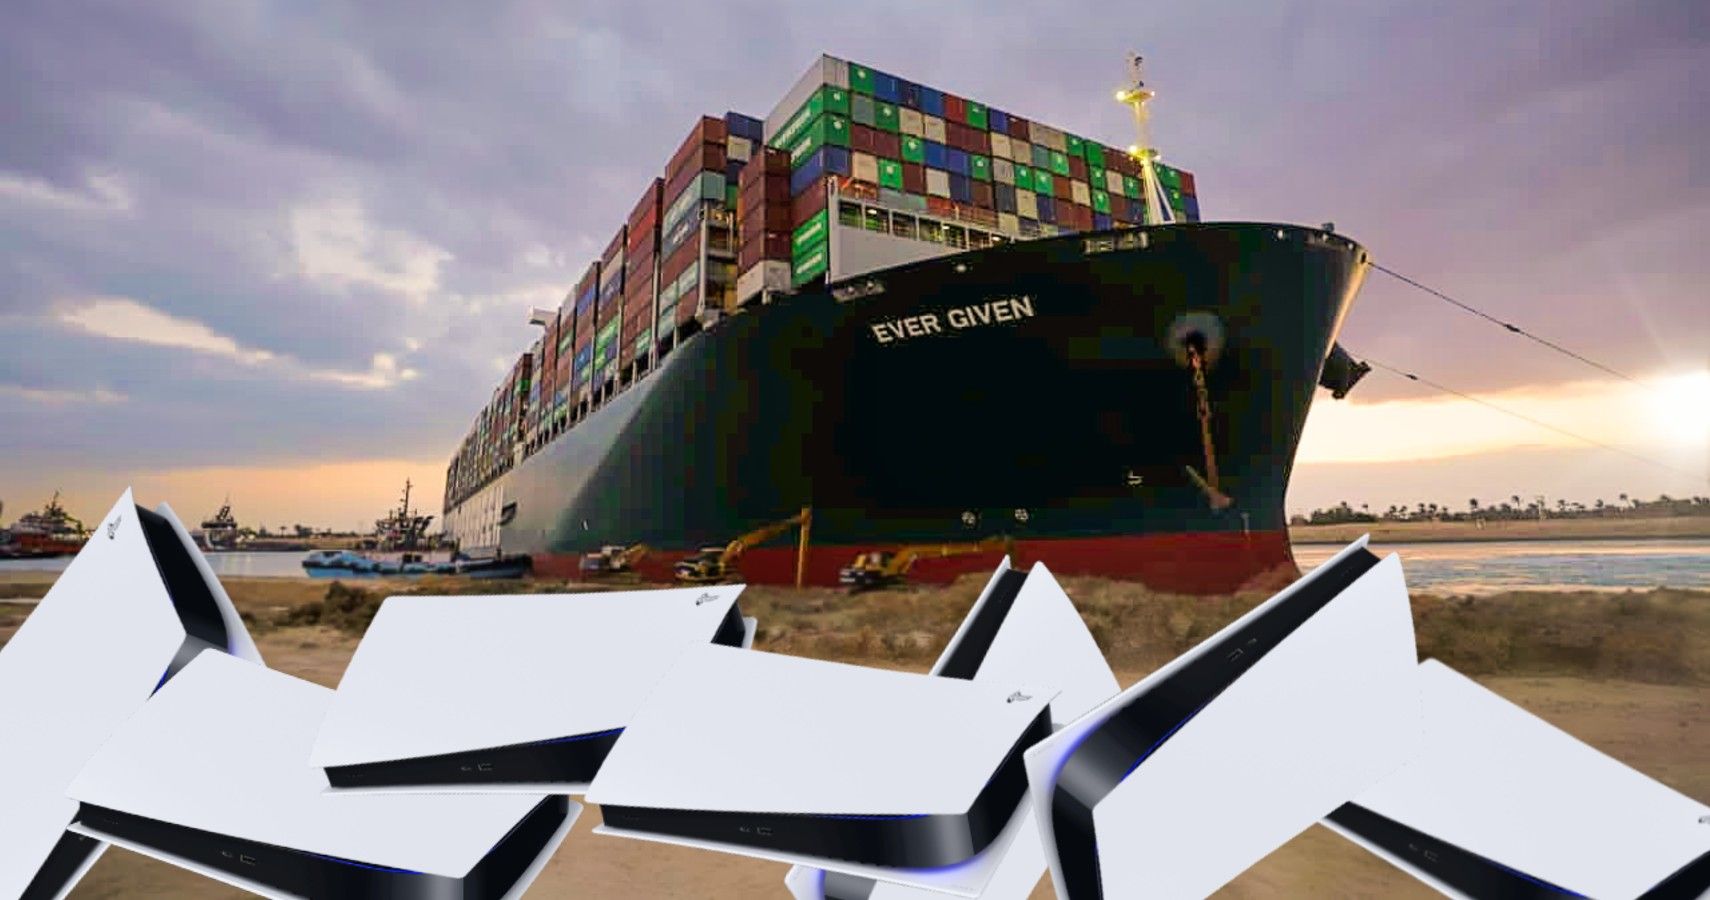 PS5 Stock Could Be Affected By The Ship Blocking The Suez Canal